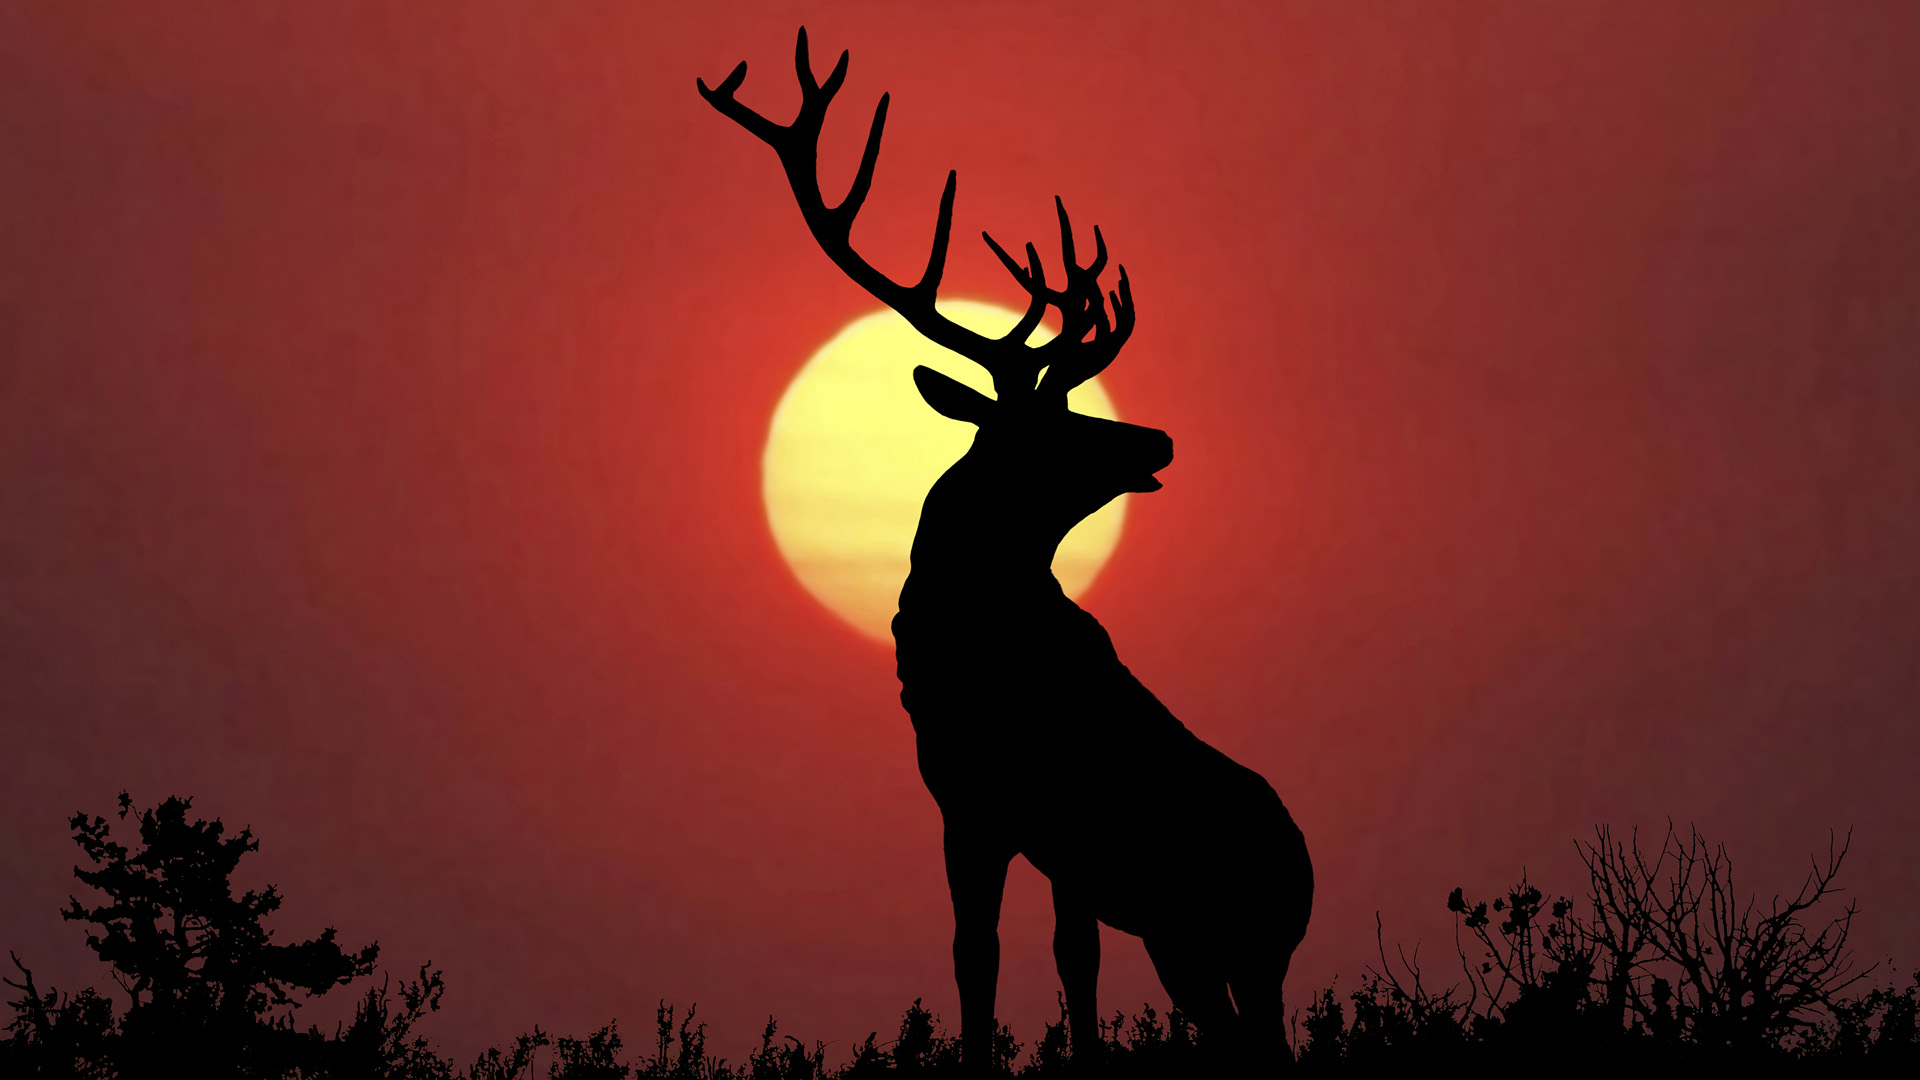 Silhouette of a majestic deer against a scenic background.